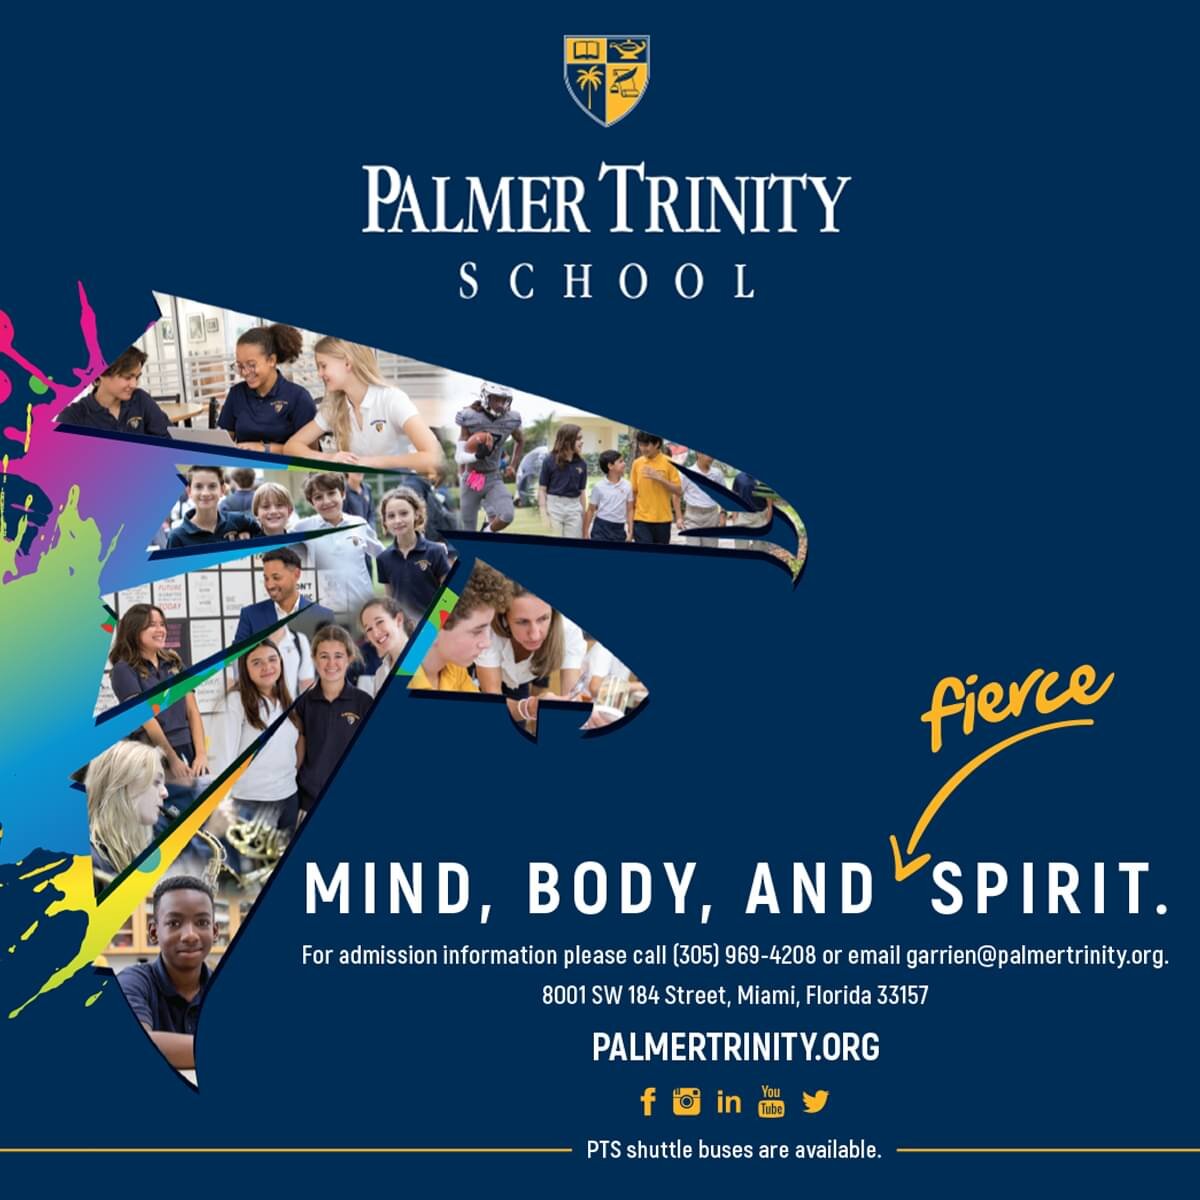 Palmer Trinity School offers students in grades 6-12 a truly unique independent school experience, ensuring an appropriately challenging and supportive environment. Palmer Trinity students are encouraged not only to attain individual success but to u